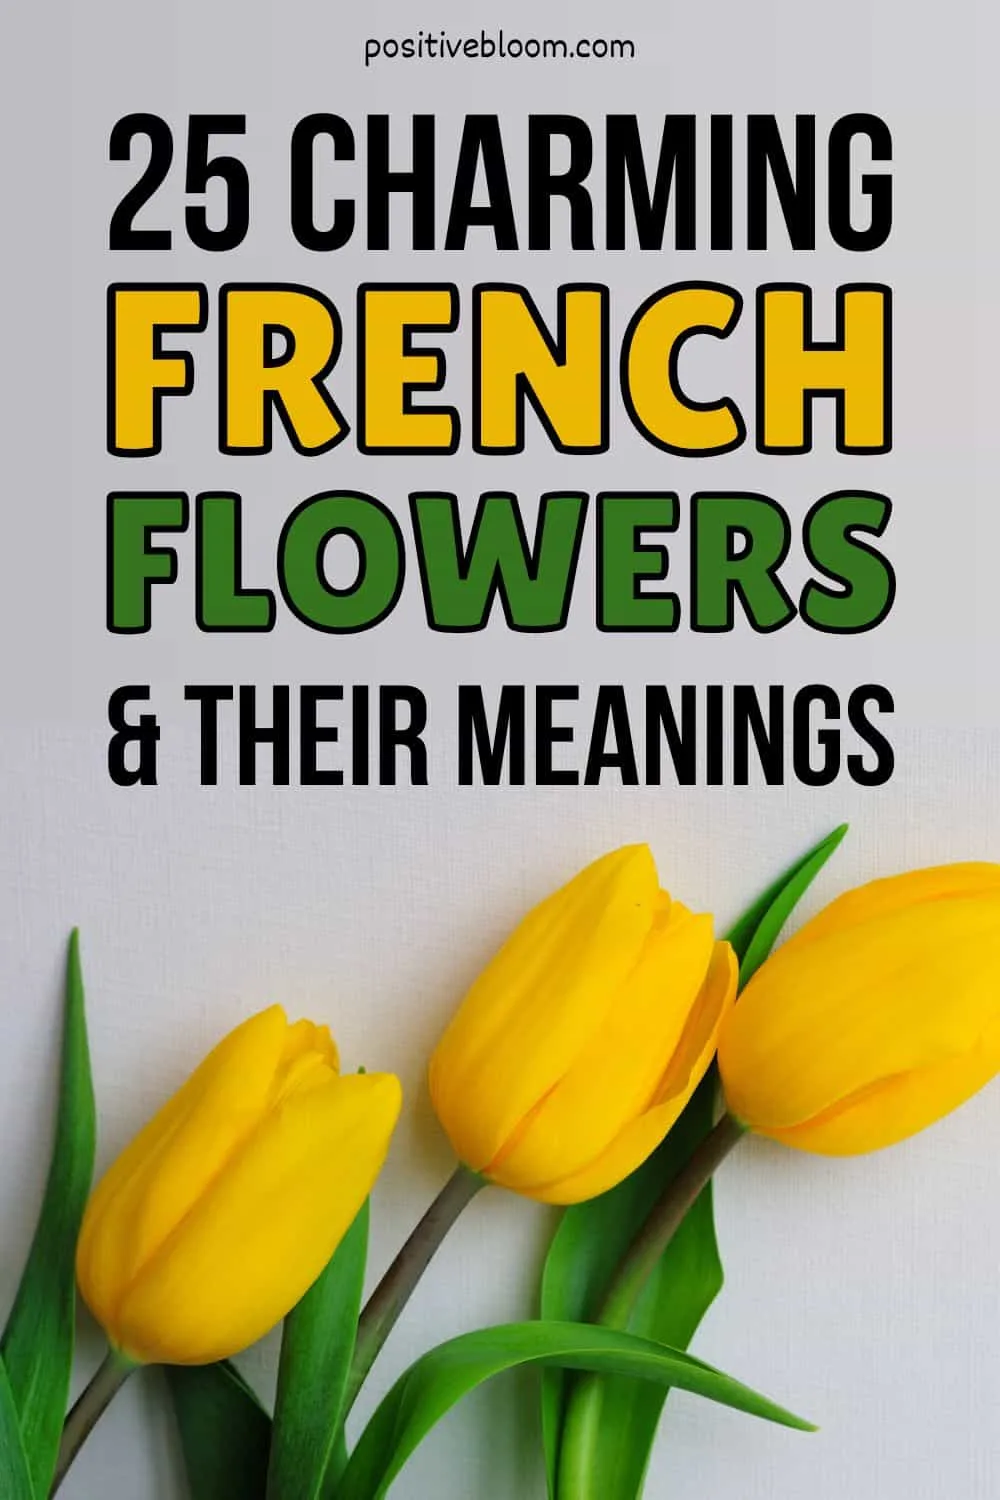 25 Charming French Flowers And Their Meanings Pinterest